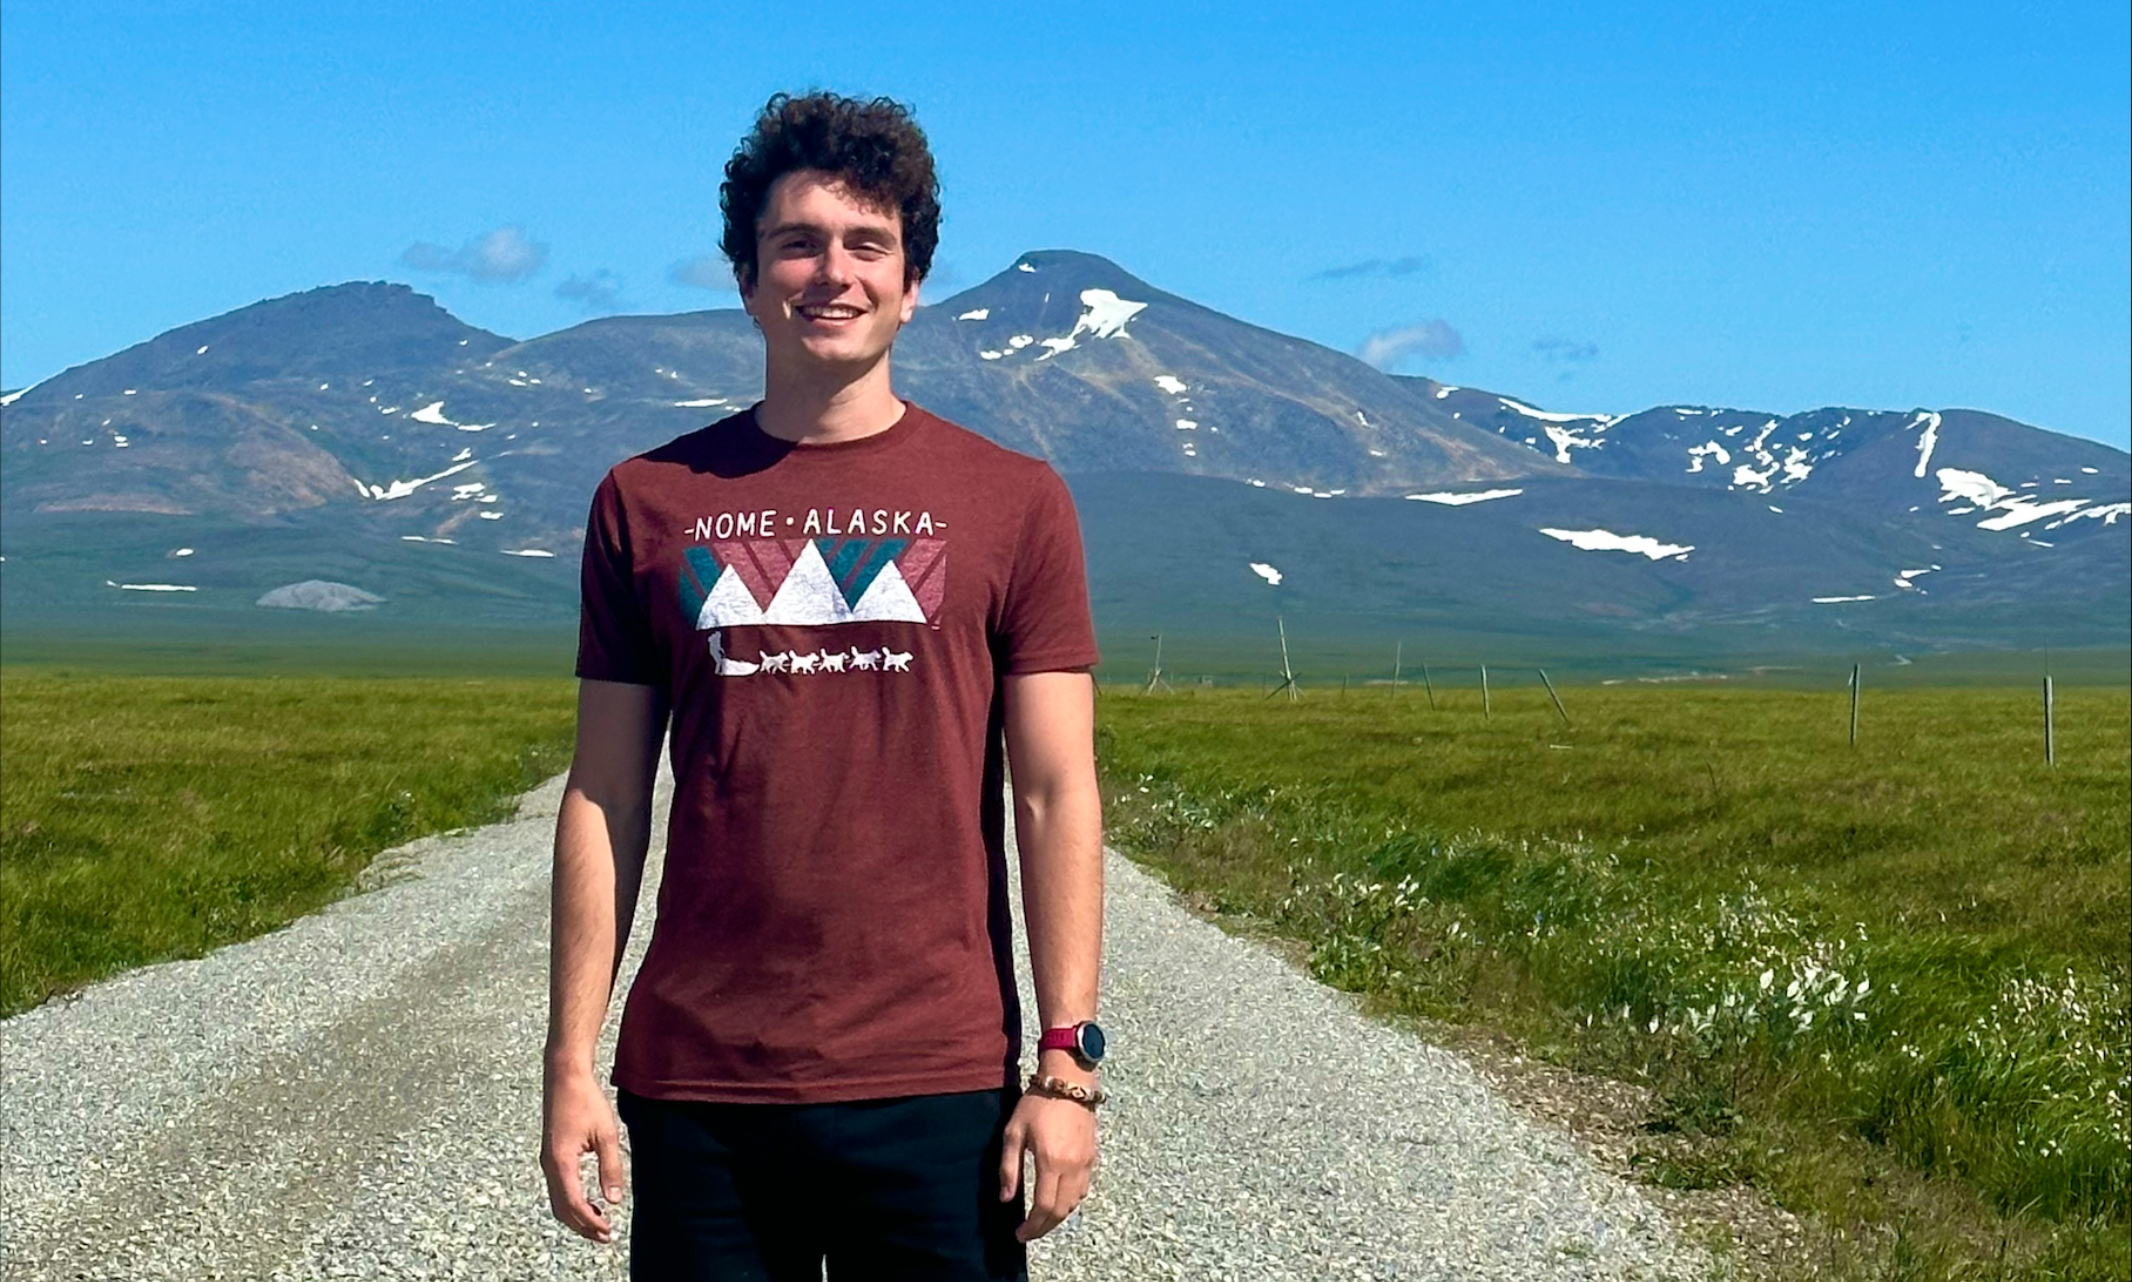 Photo of Caleb Feuerbacher in Alaska standing outdoors with large mountain in background